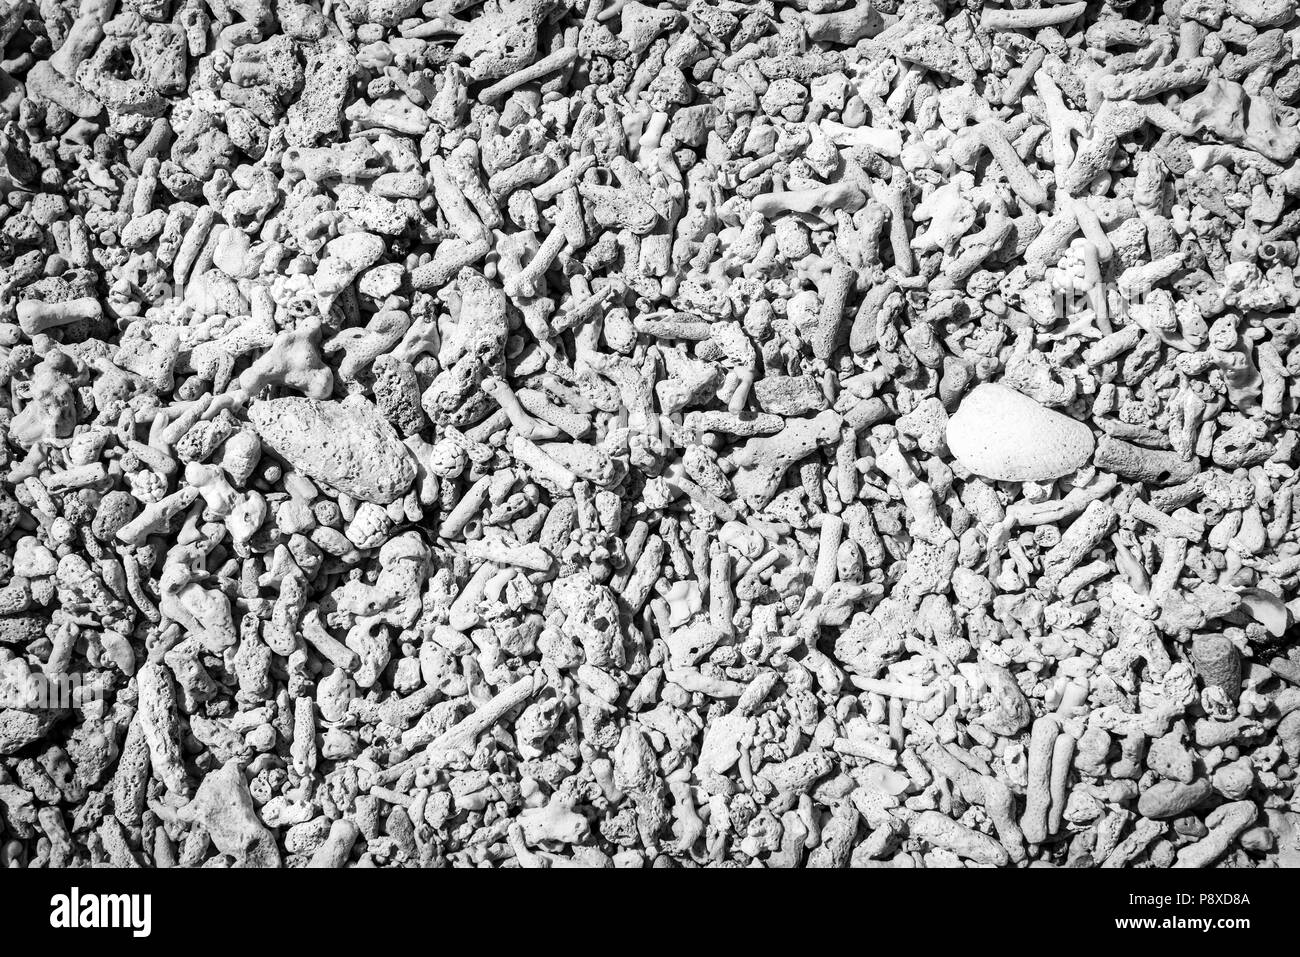 Dead coral and shells on a beach as background texture in black and white Stock Photo